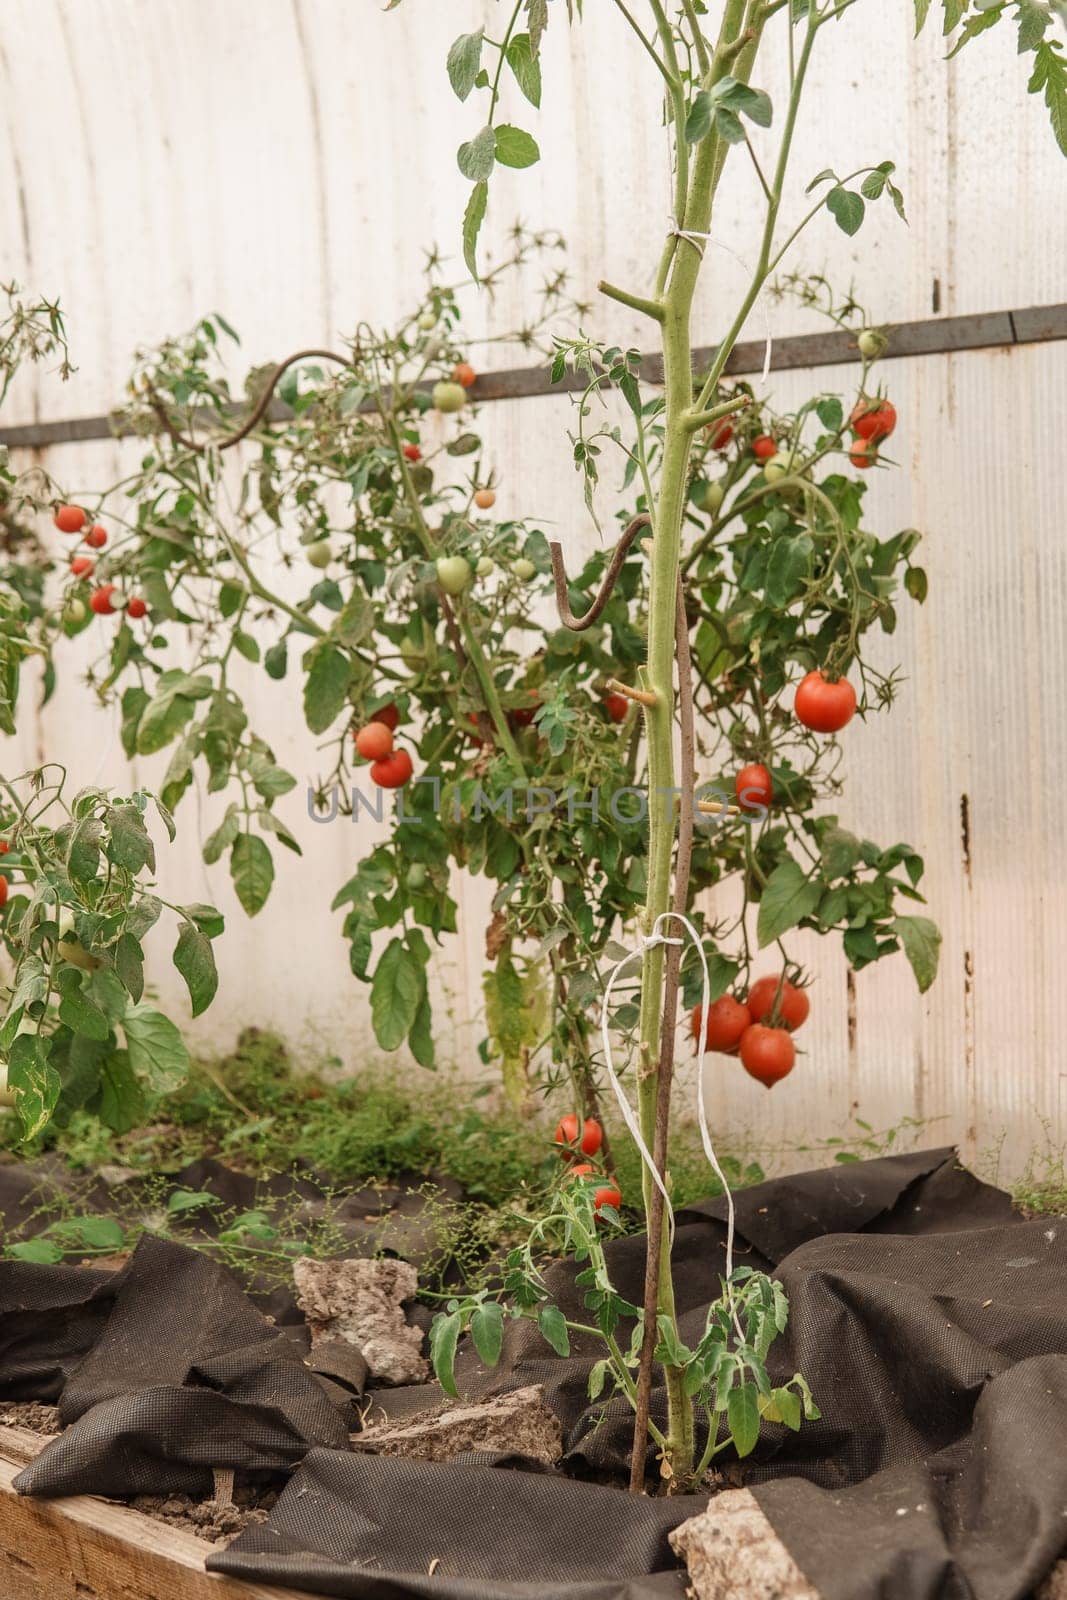 Tomatoes are hanging on a branch in the greenhouse. The concept of gardening and life in the country. A large greenhouse for growing homemade tomatoes. by Annu1tochka